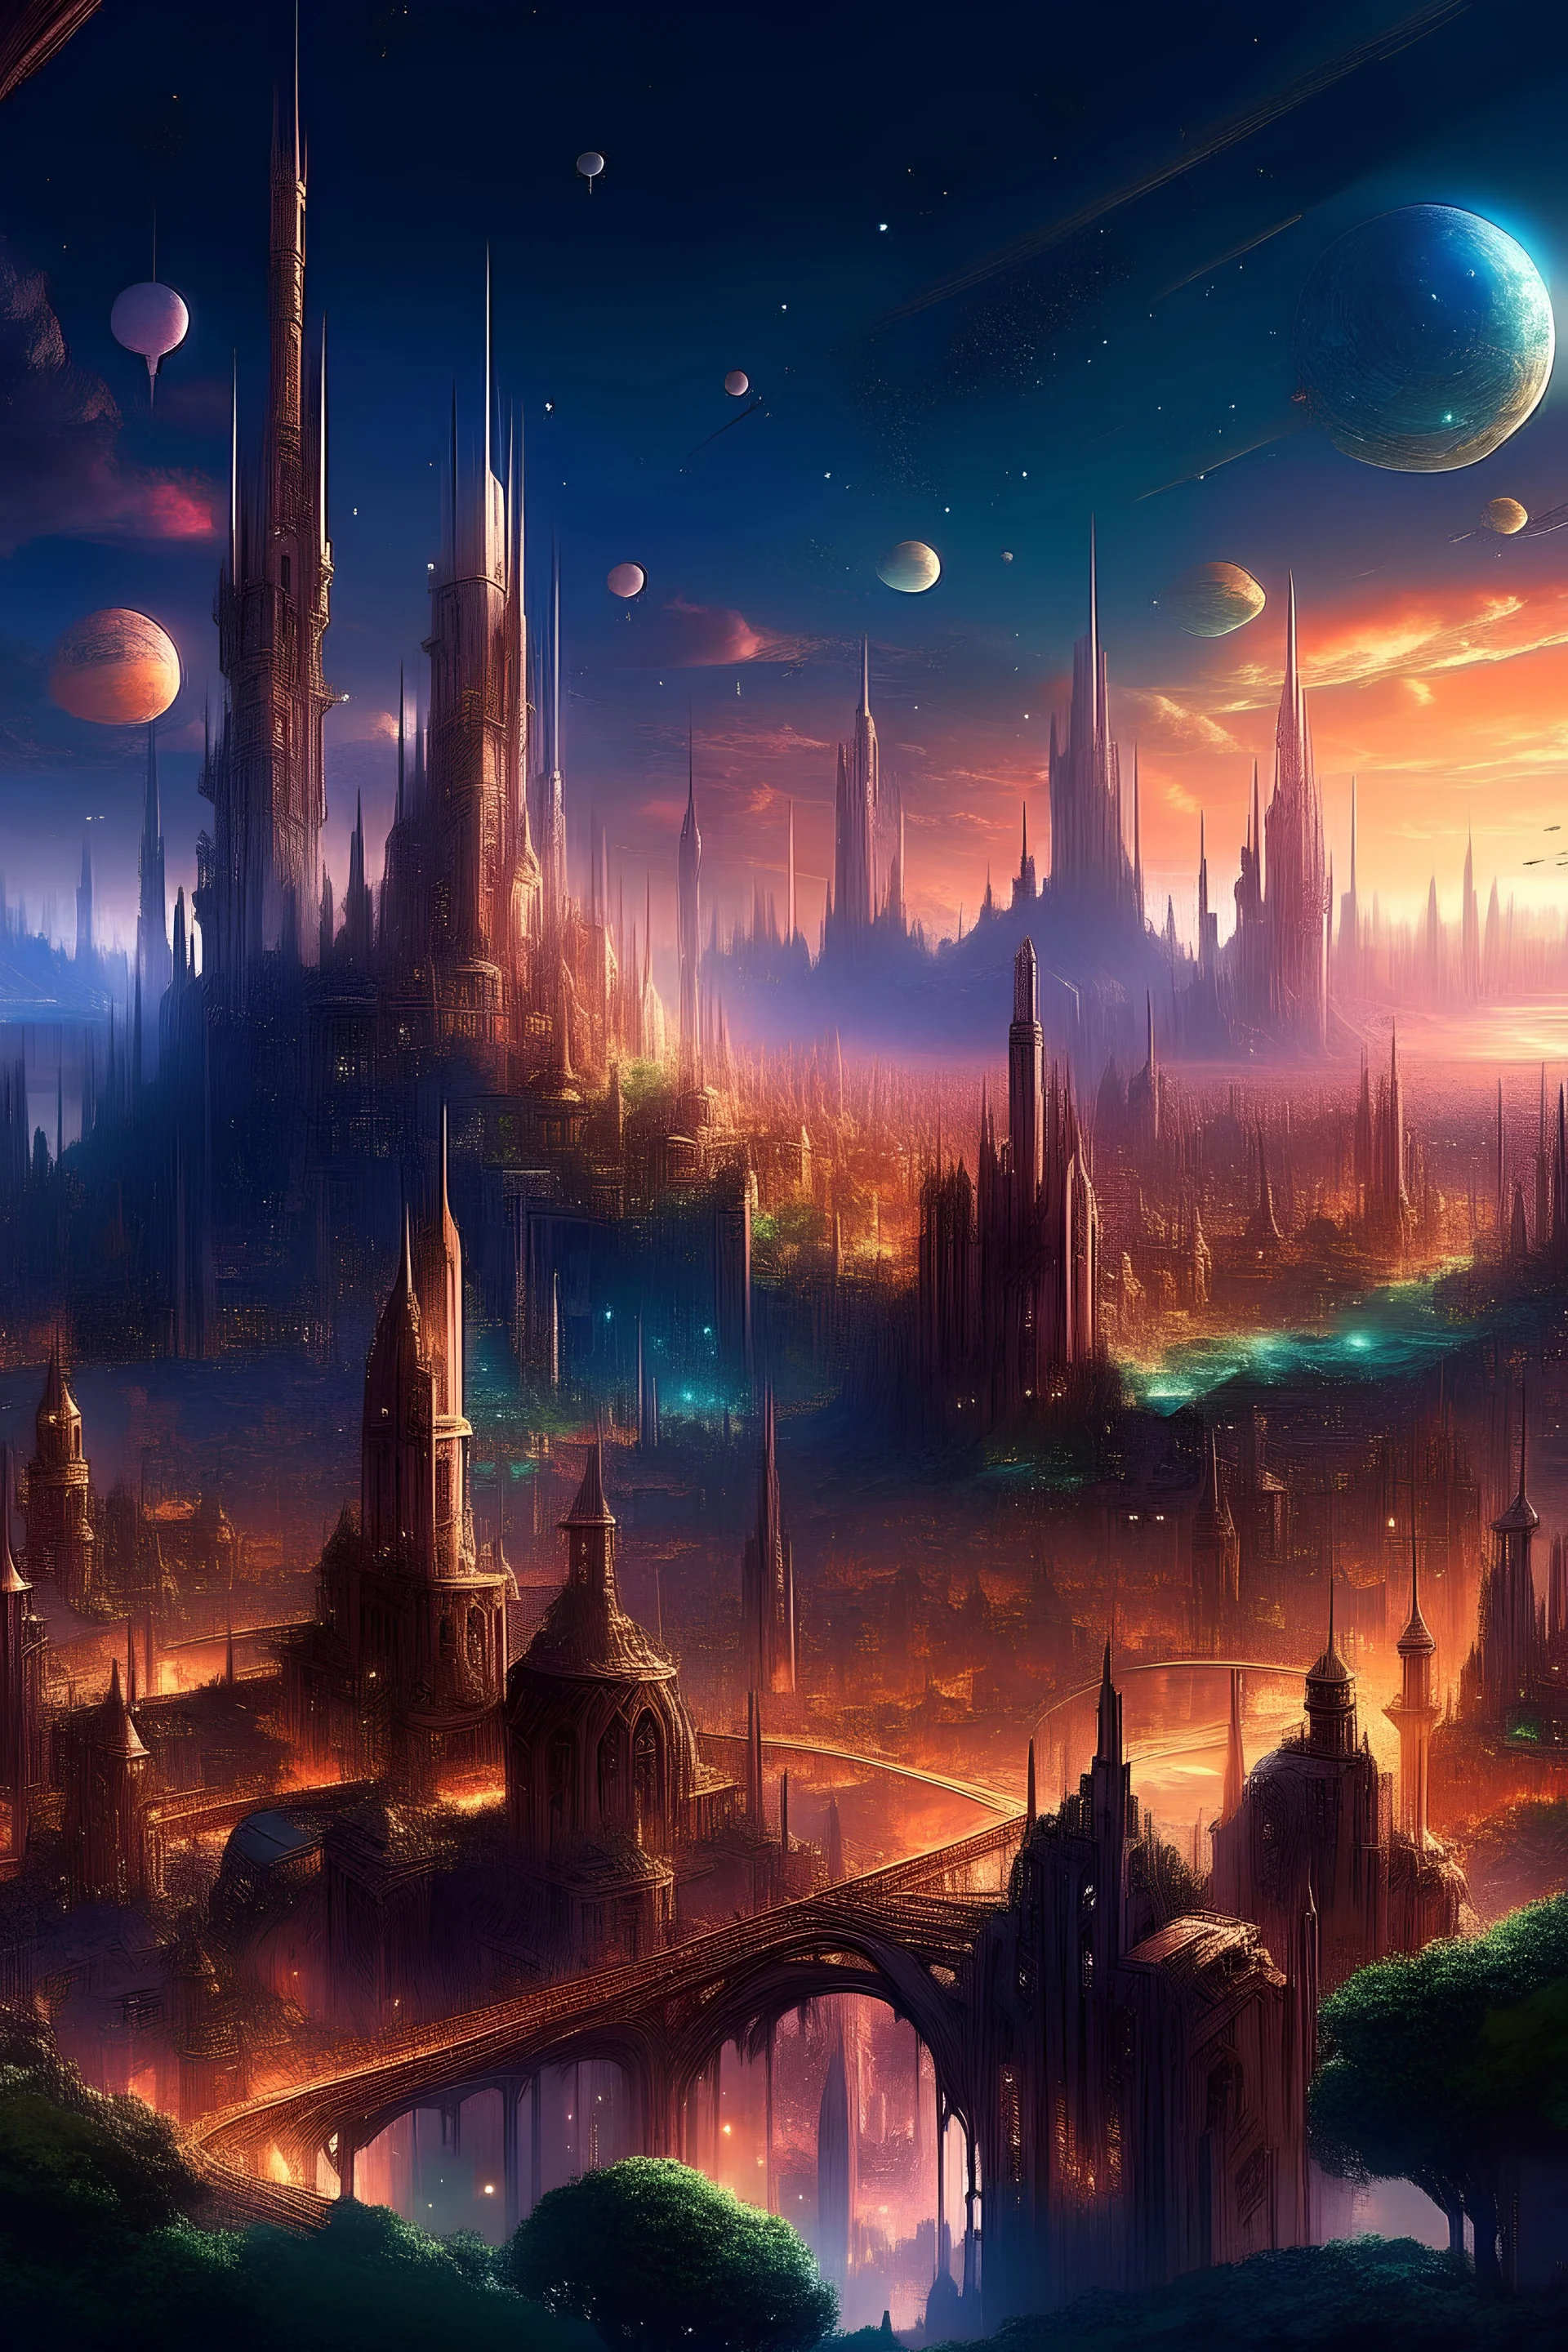 An amazing view of a fantasy city. You see tall towers touching the sky and streets sparkling with lights and colours.